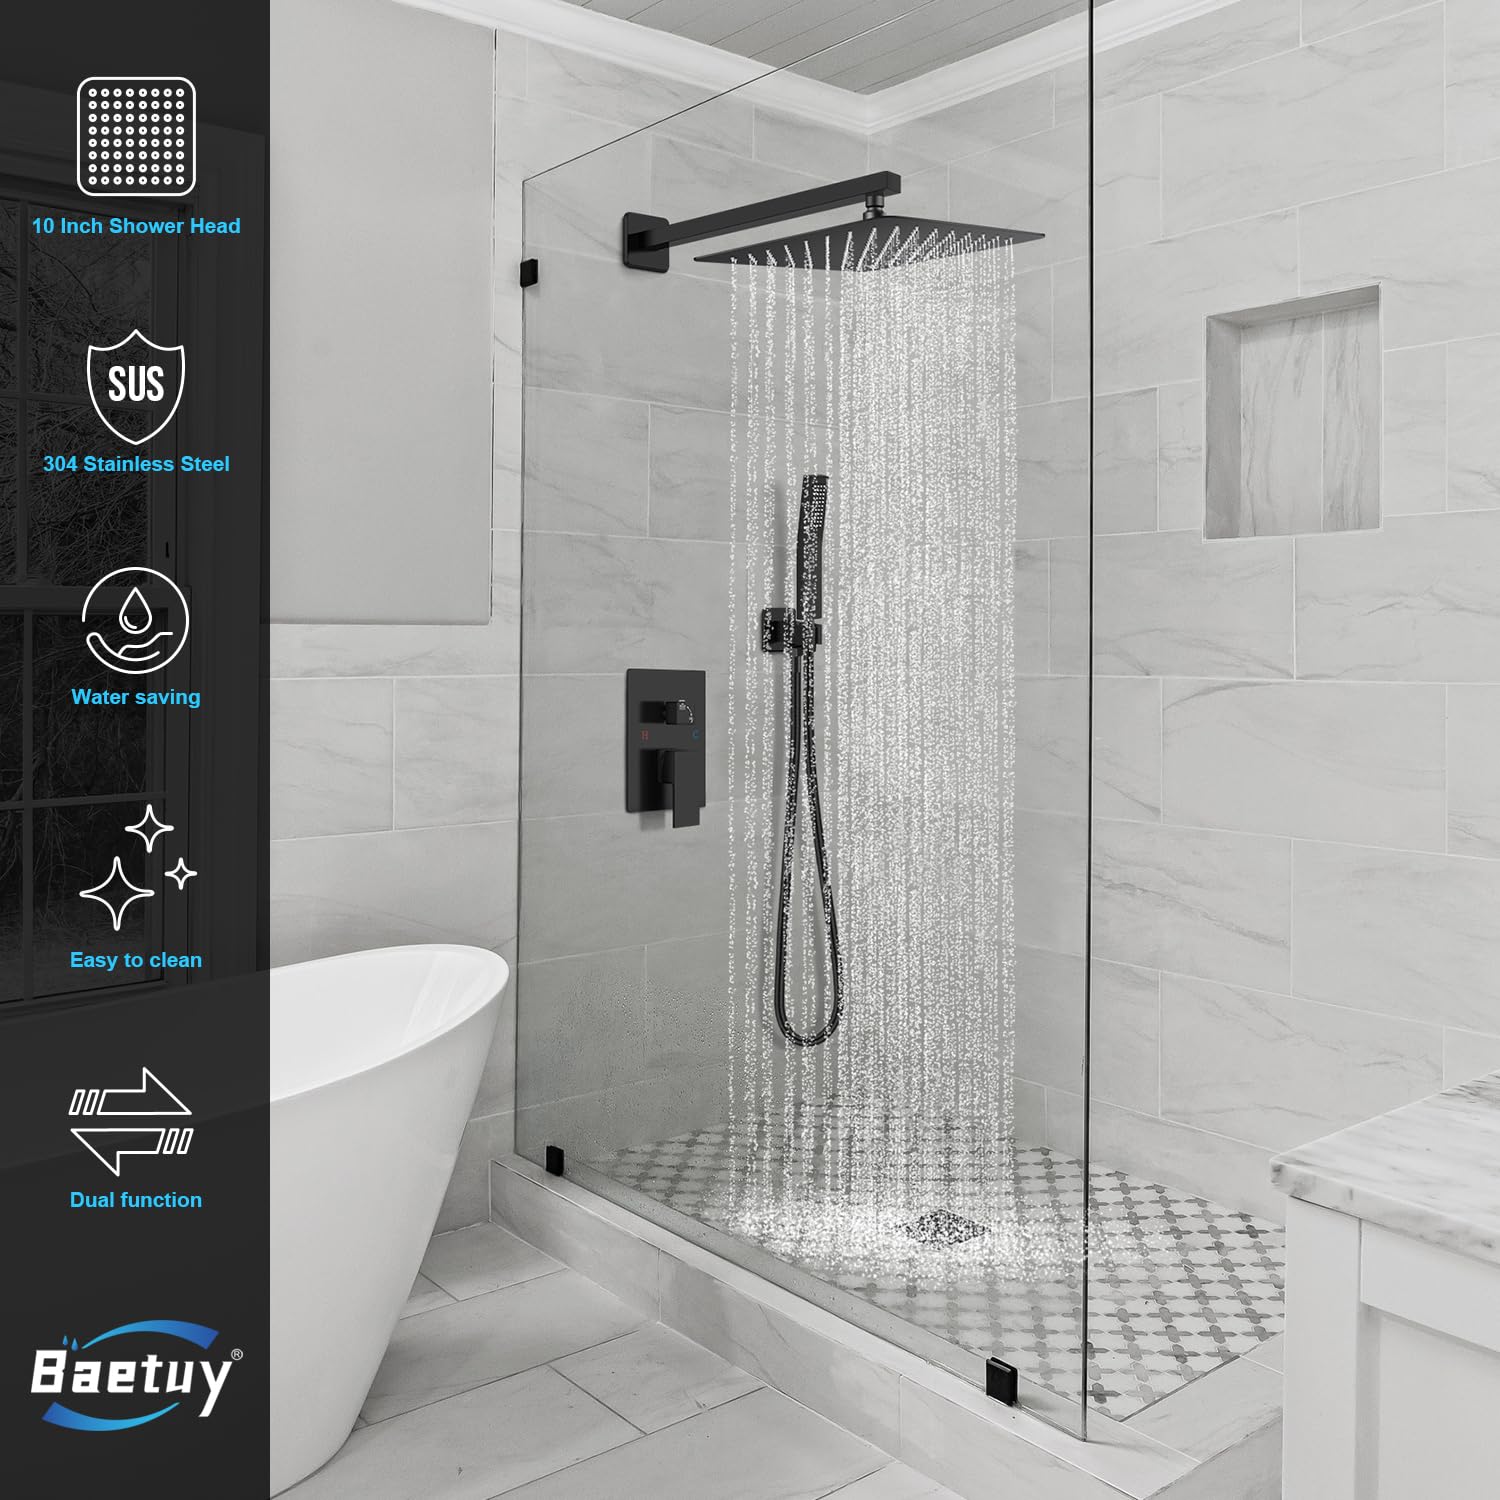 Baetuy 12 Inch Shower Faucet Set, Rainfall Shower System with High Pressure Handheld and Square Fixed Shower Head,Spray Wall Mounted Shower Fixtures